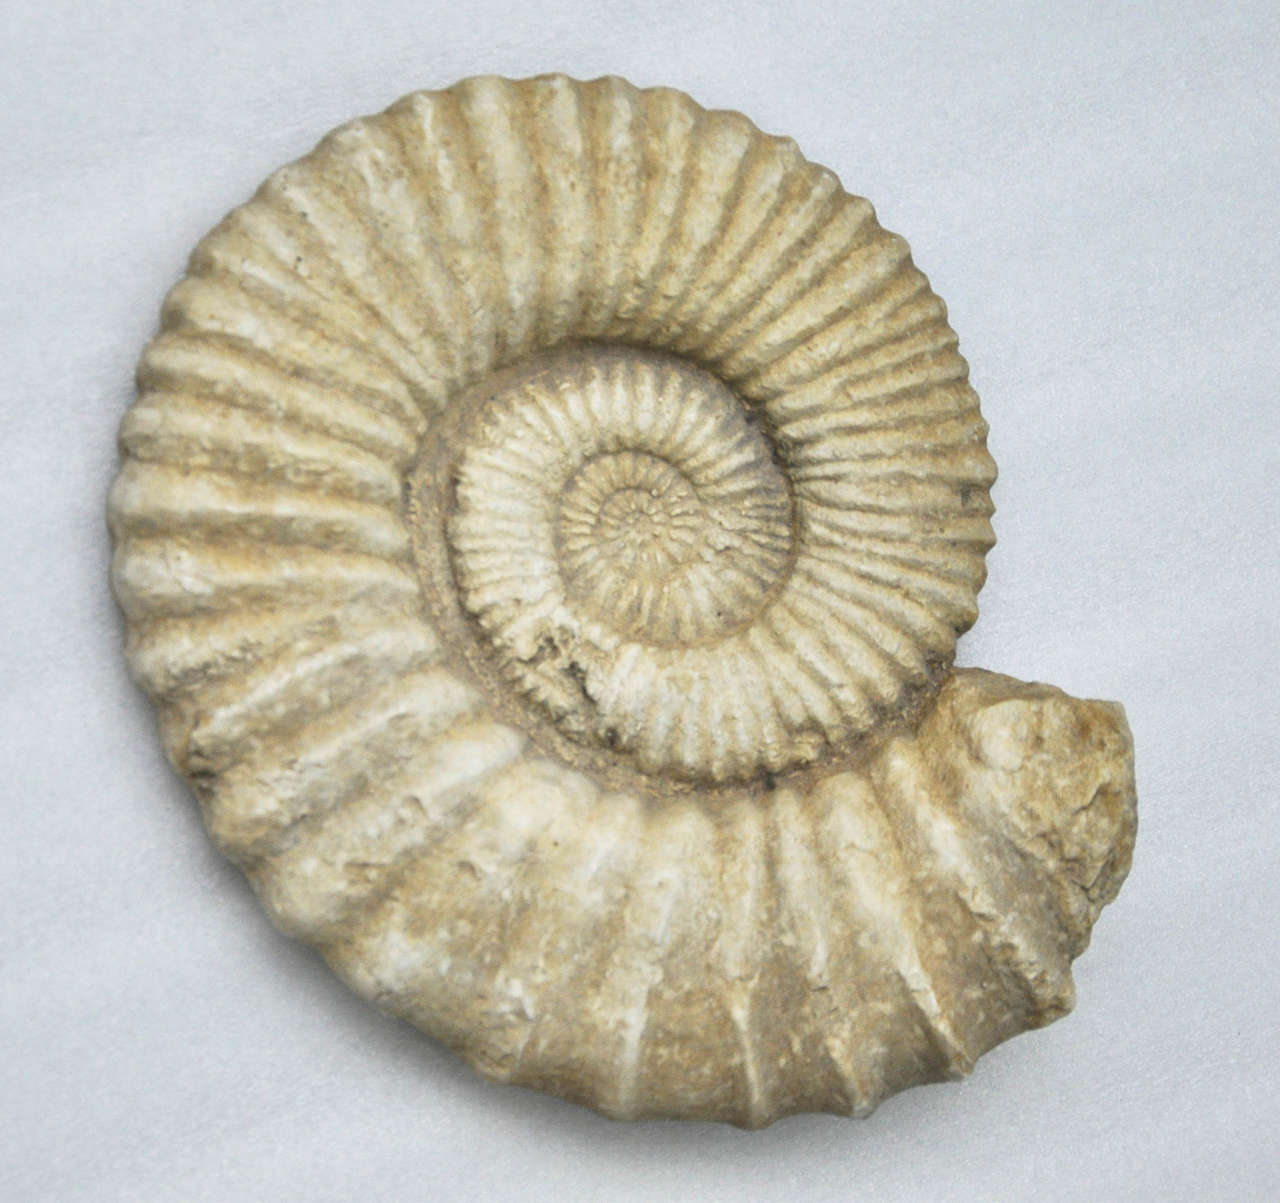 Calcified / fossilized spiral ammonite shell in very good condition.